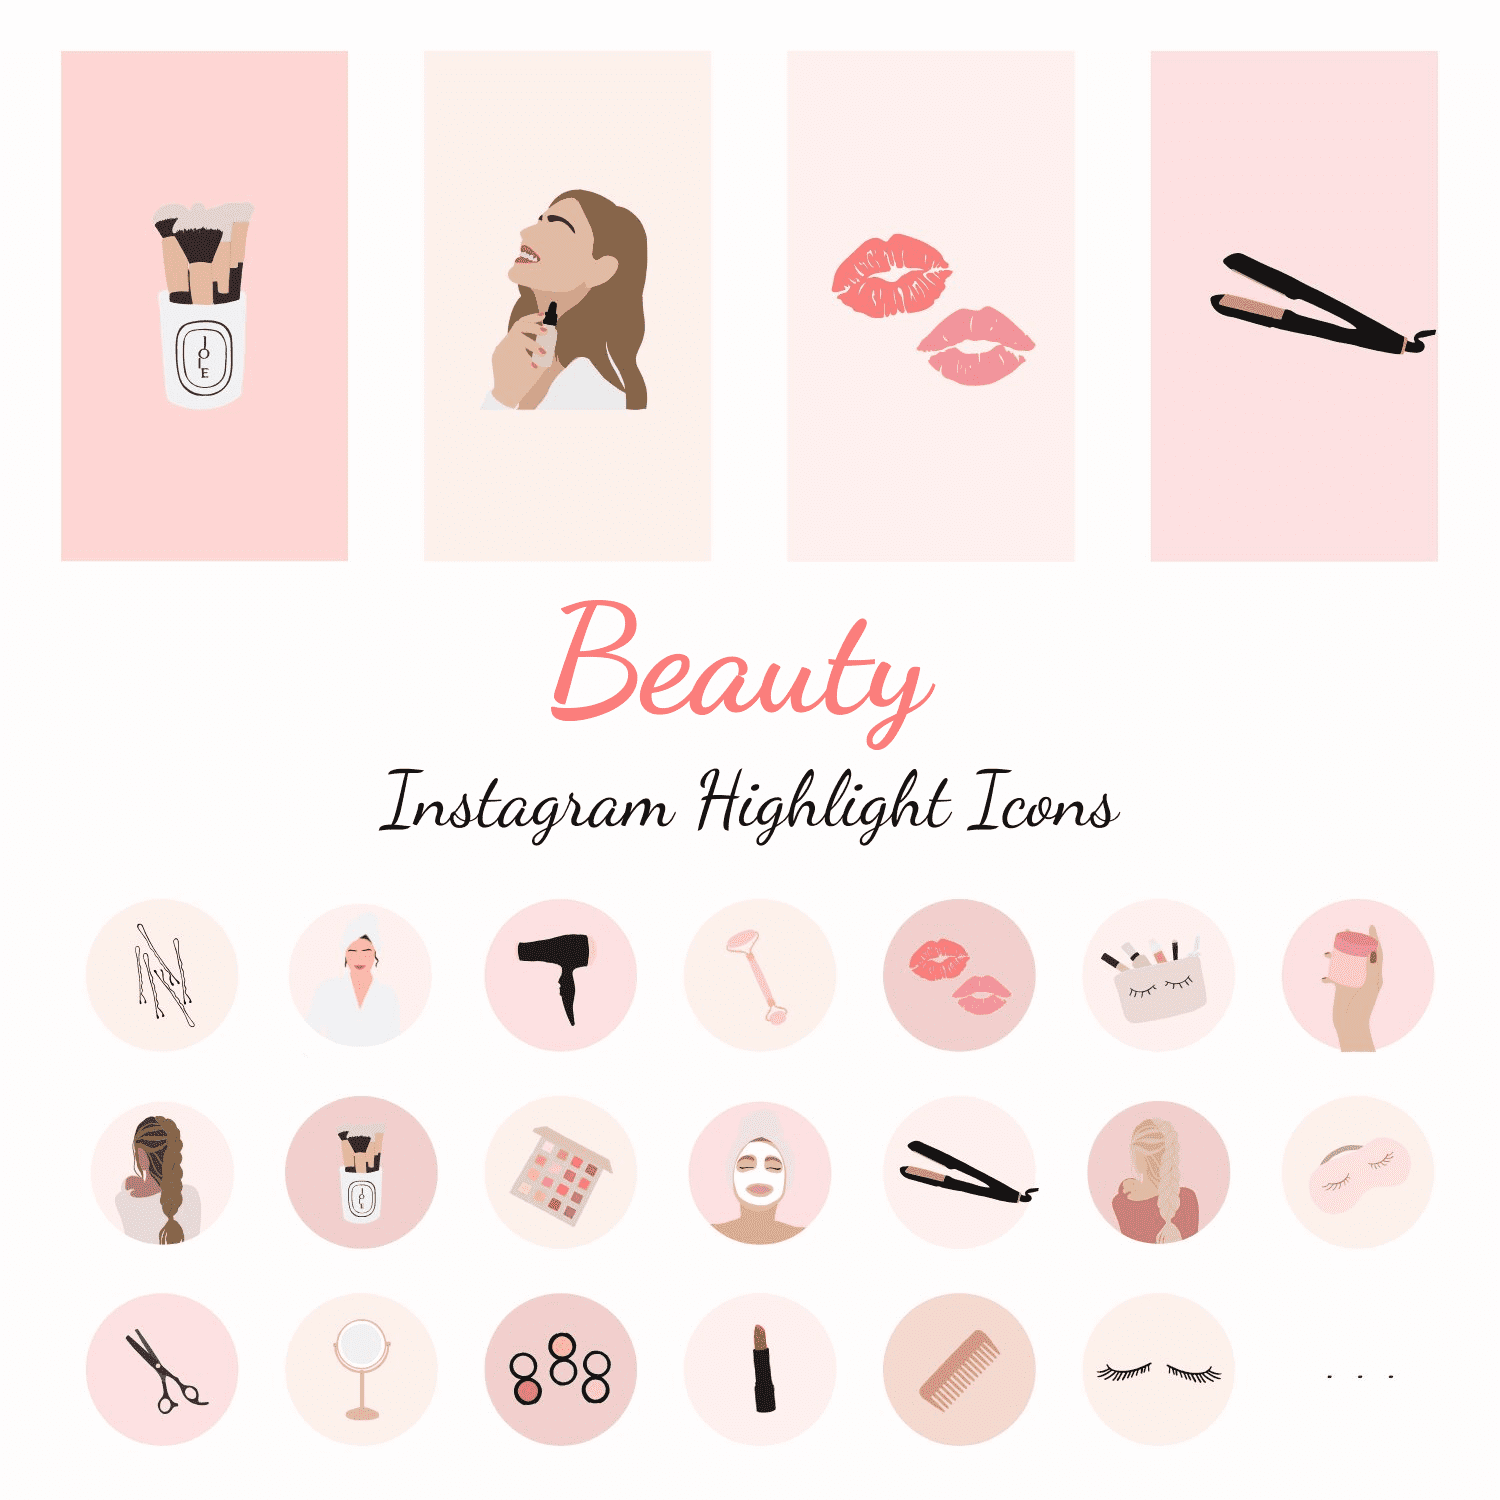 Beauty Instagram Highlight Icons.